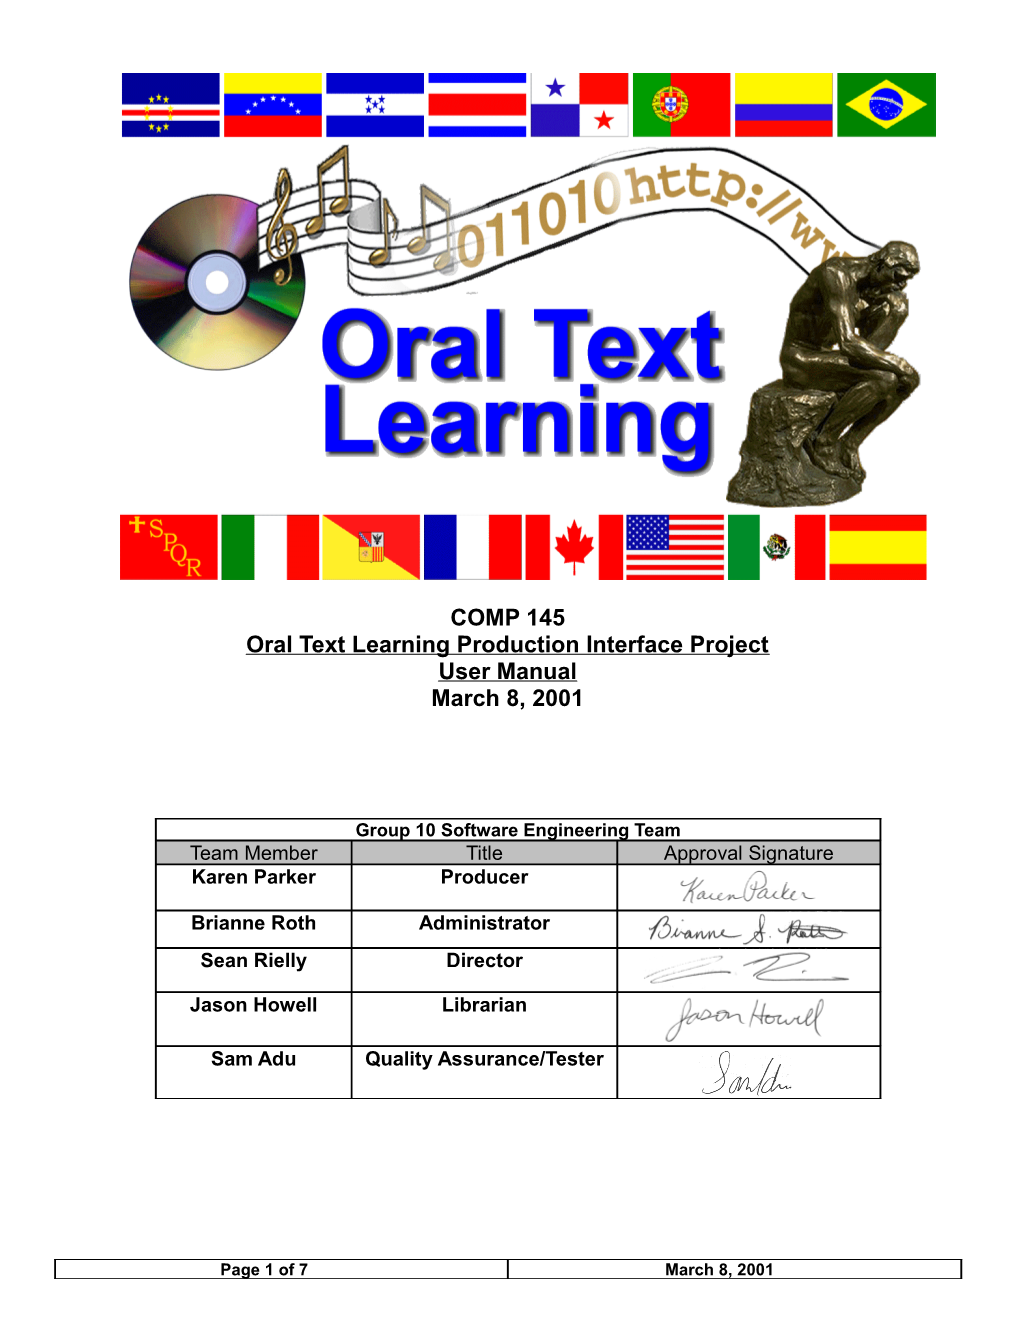 Oral Text Learning Production Interface Project